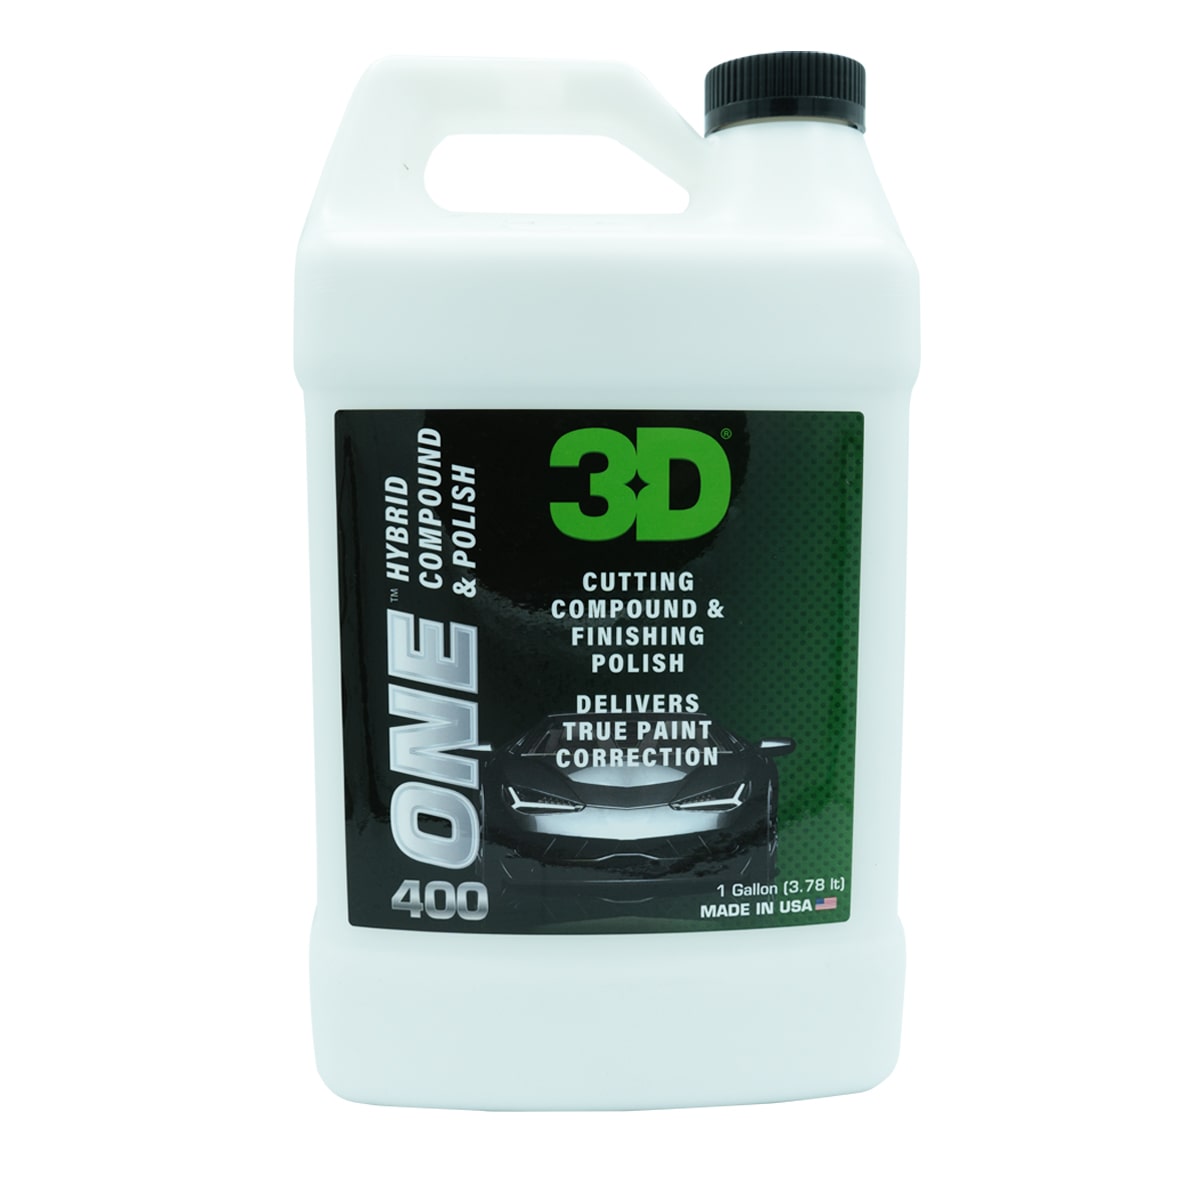 3d one one step paint correction compound